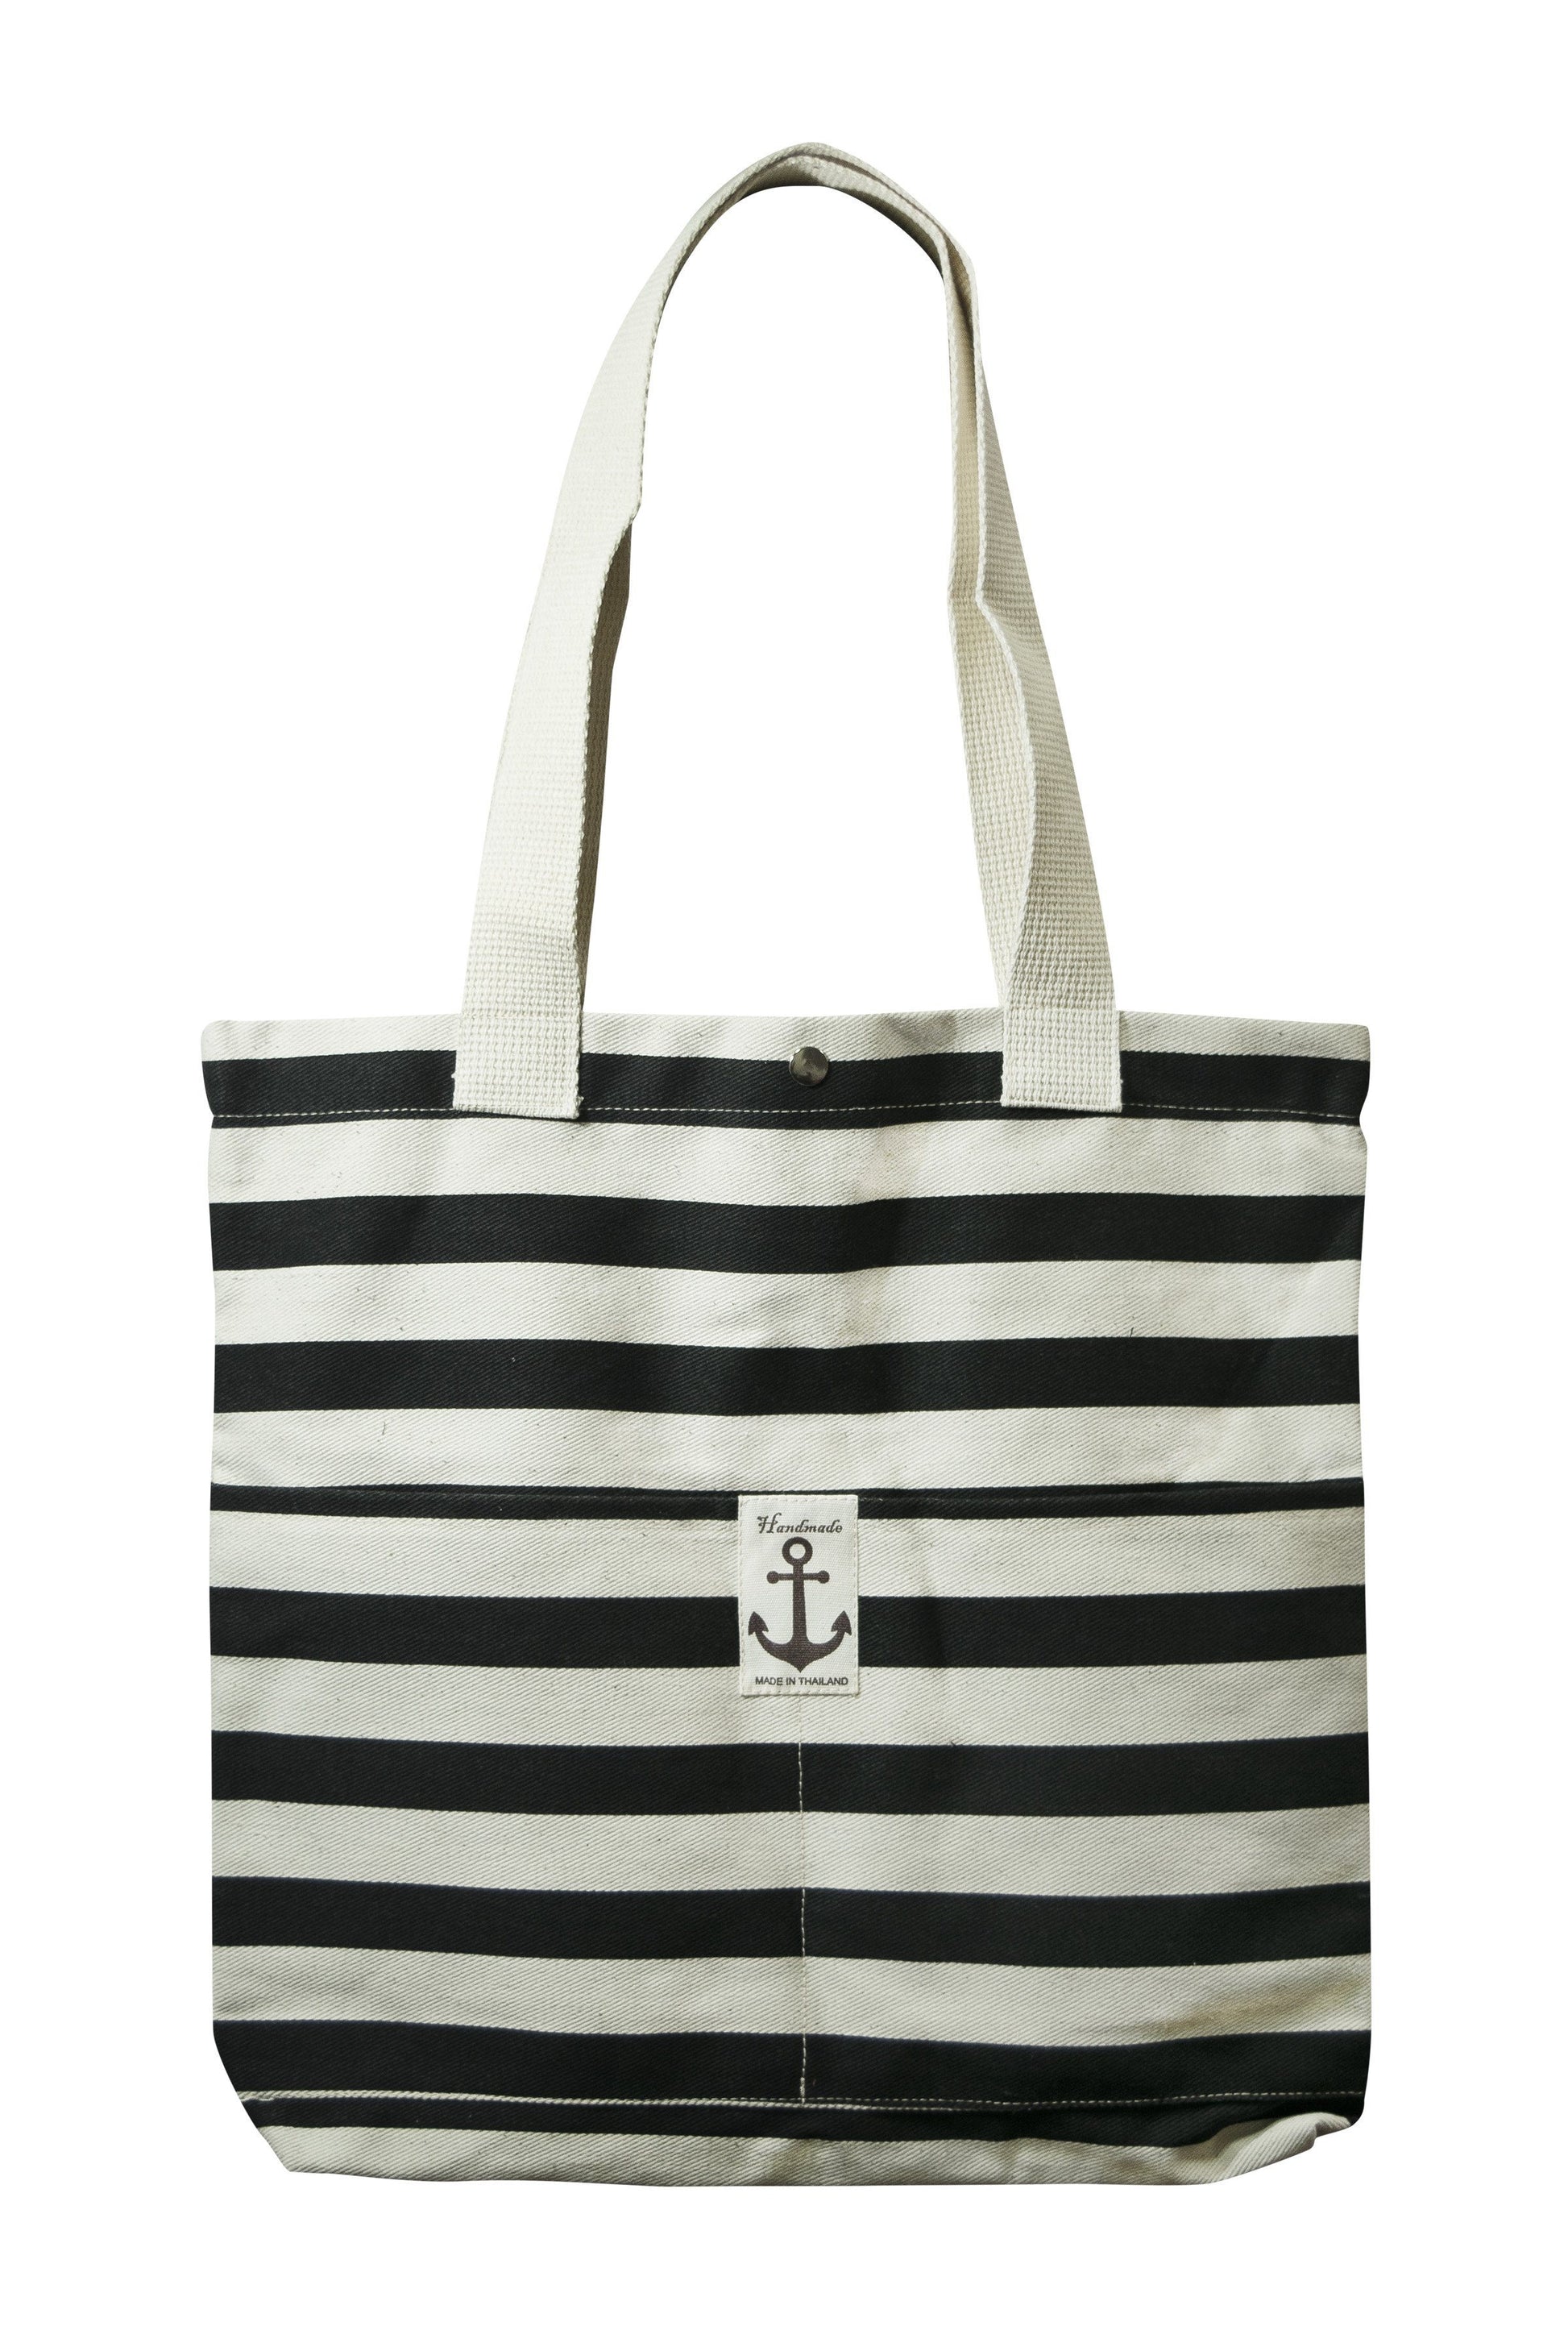 Mrs. Tote Shoulder bag Cotton Canvas Printed with Two front Pocket - CCCollections